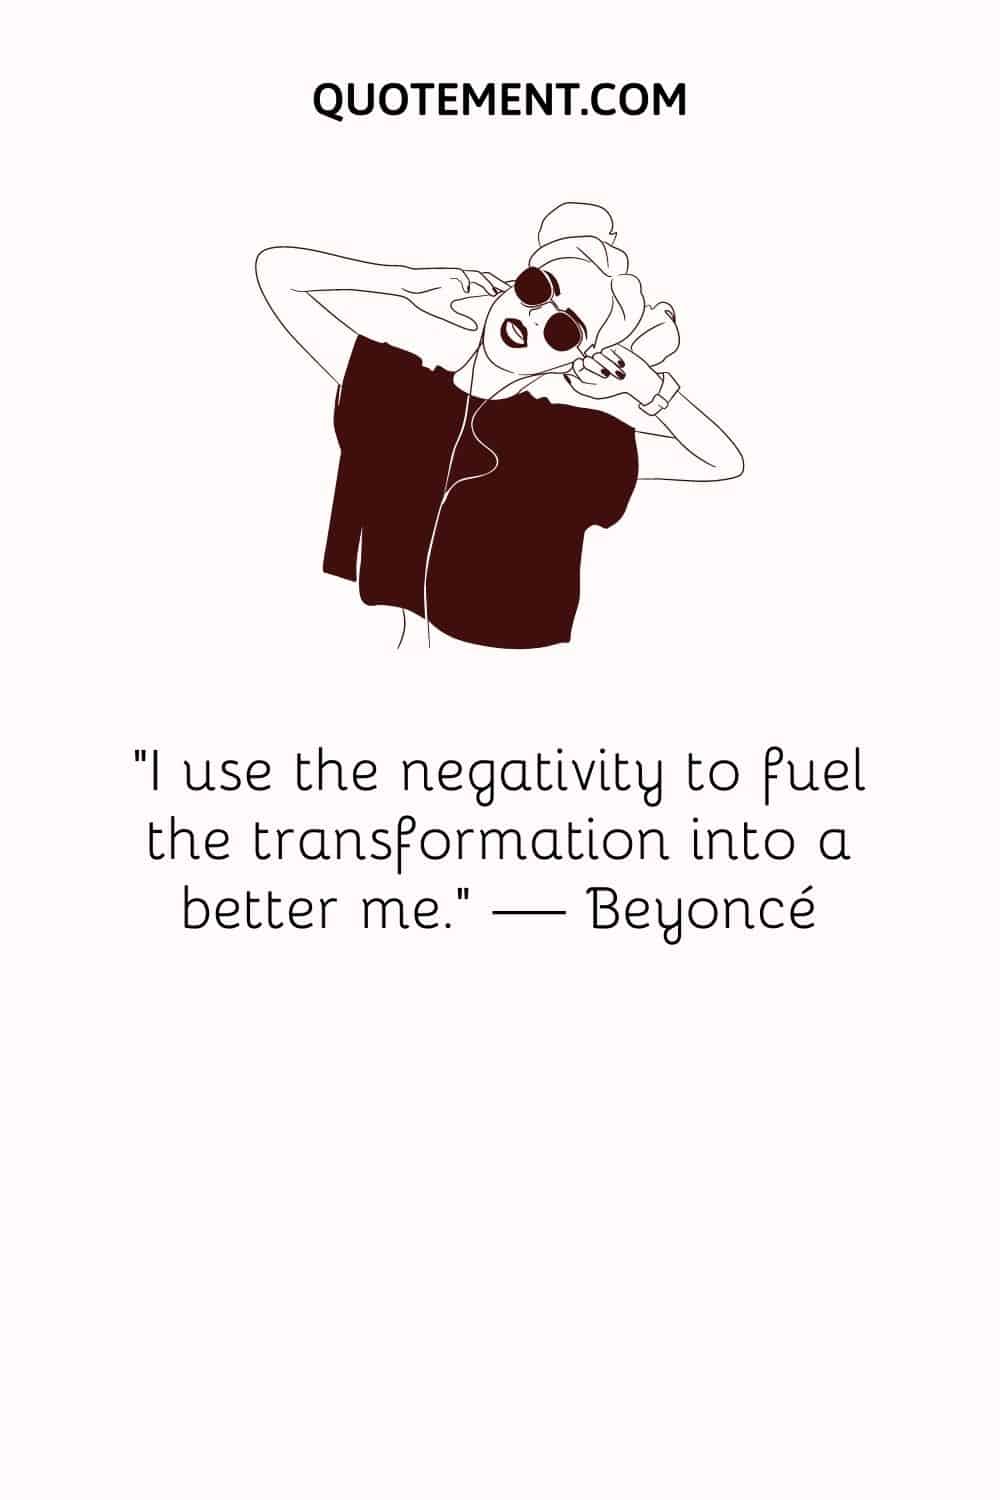 “I use the negativity to fuel the transformation into a better me.” — Beyoncé